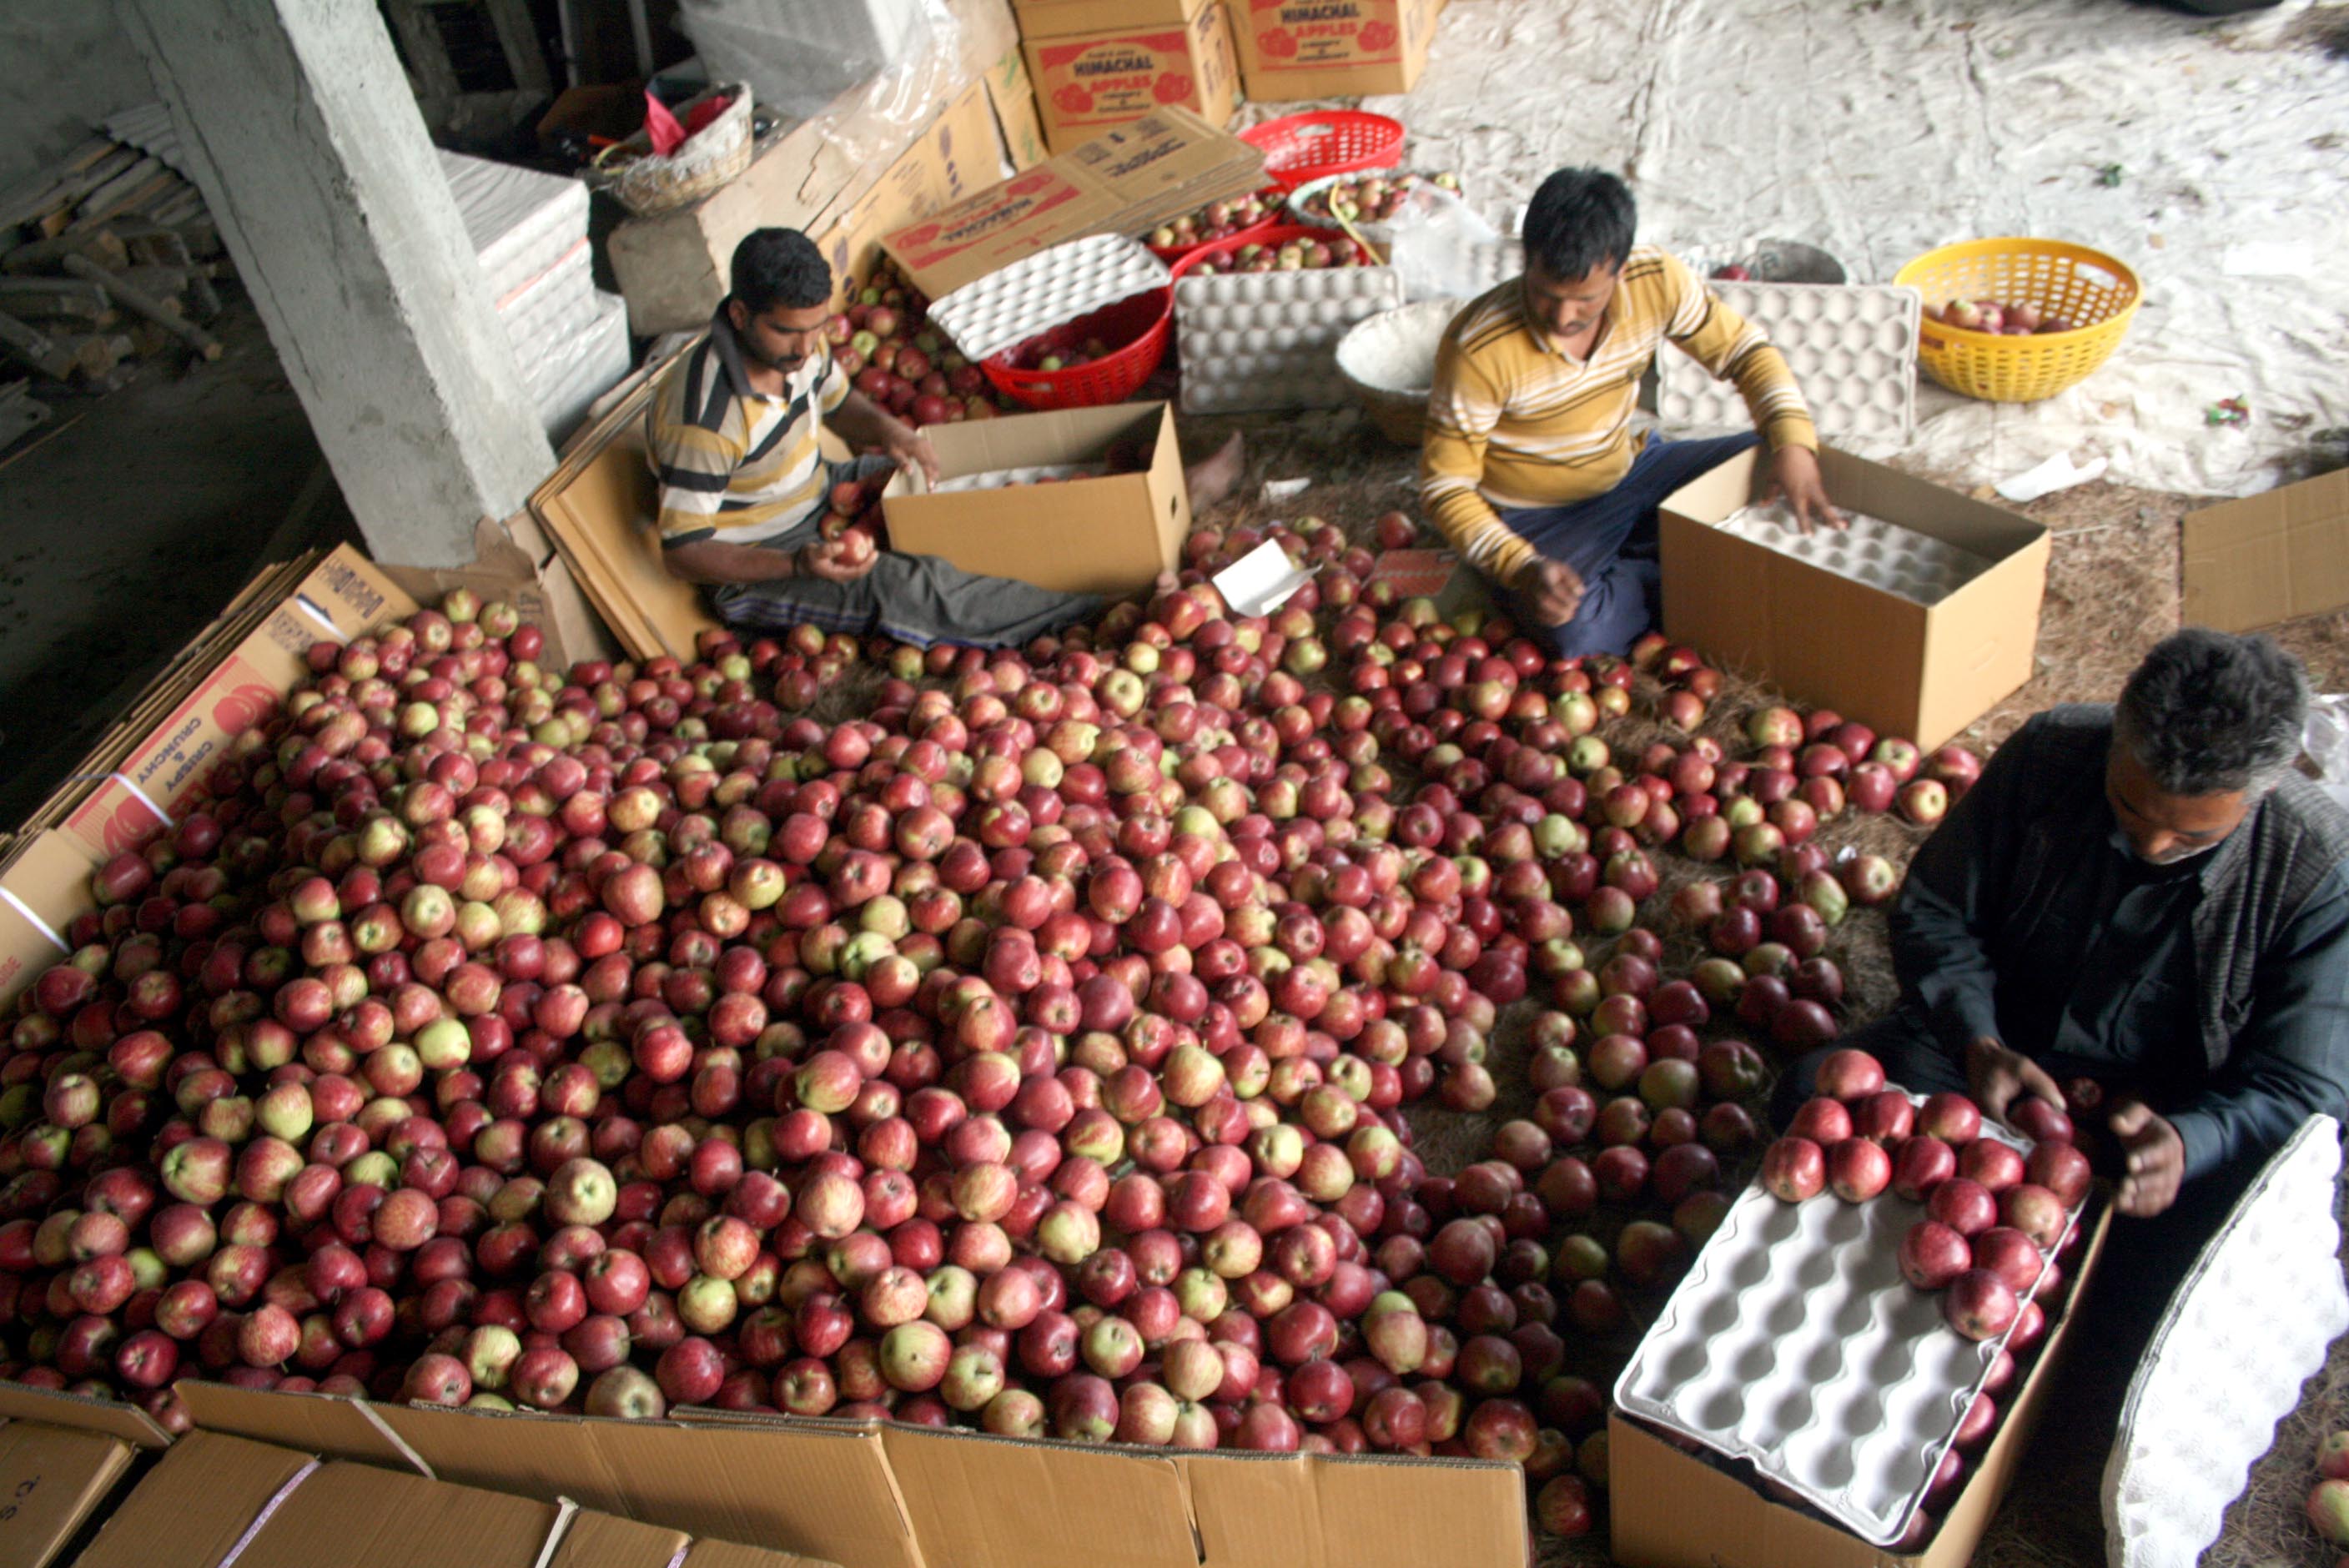 Plastic crates plan for apple marketing in Himachal Pradesh a non-starter